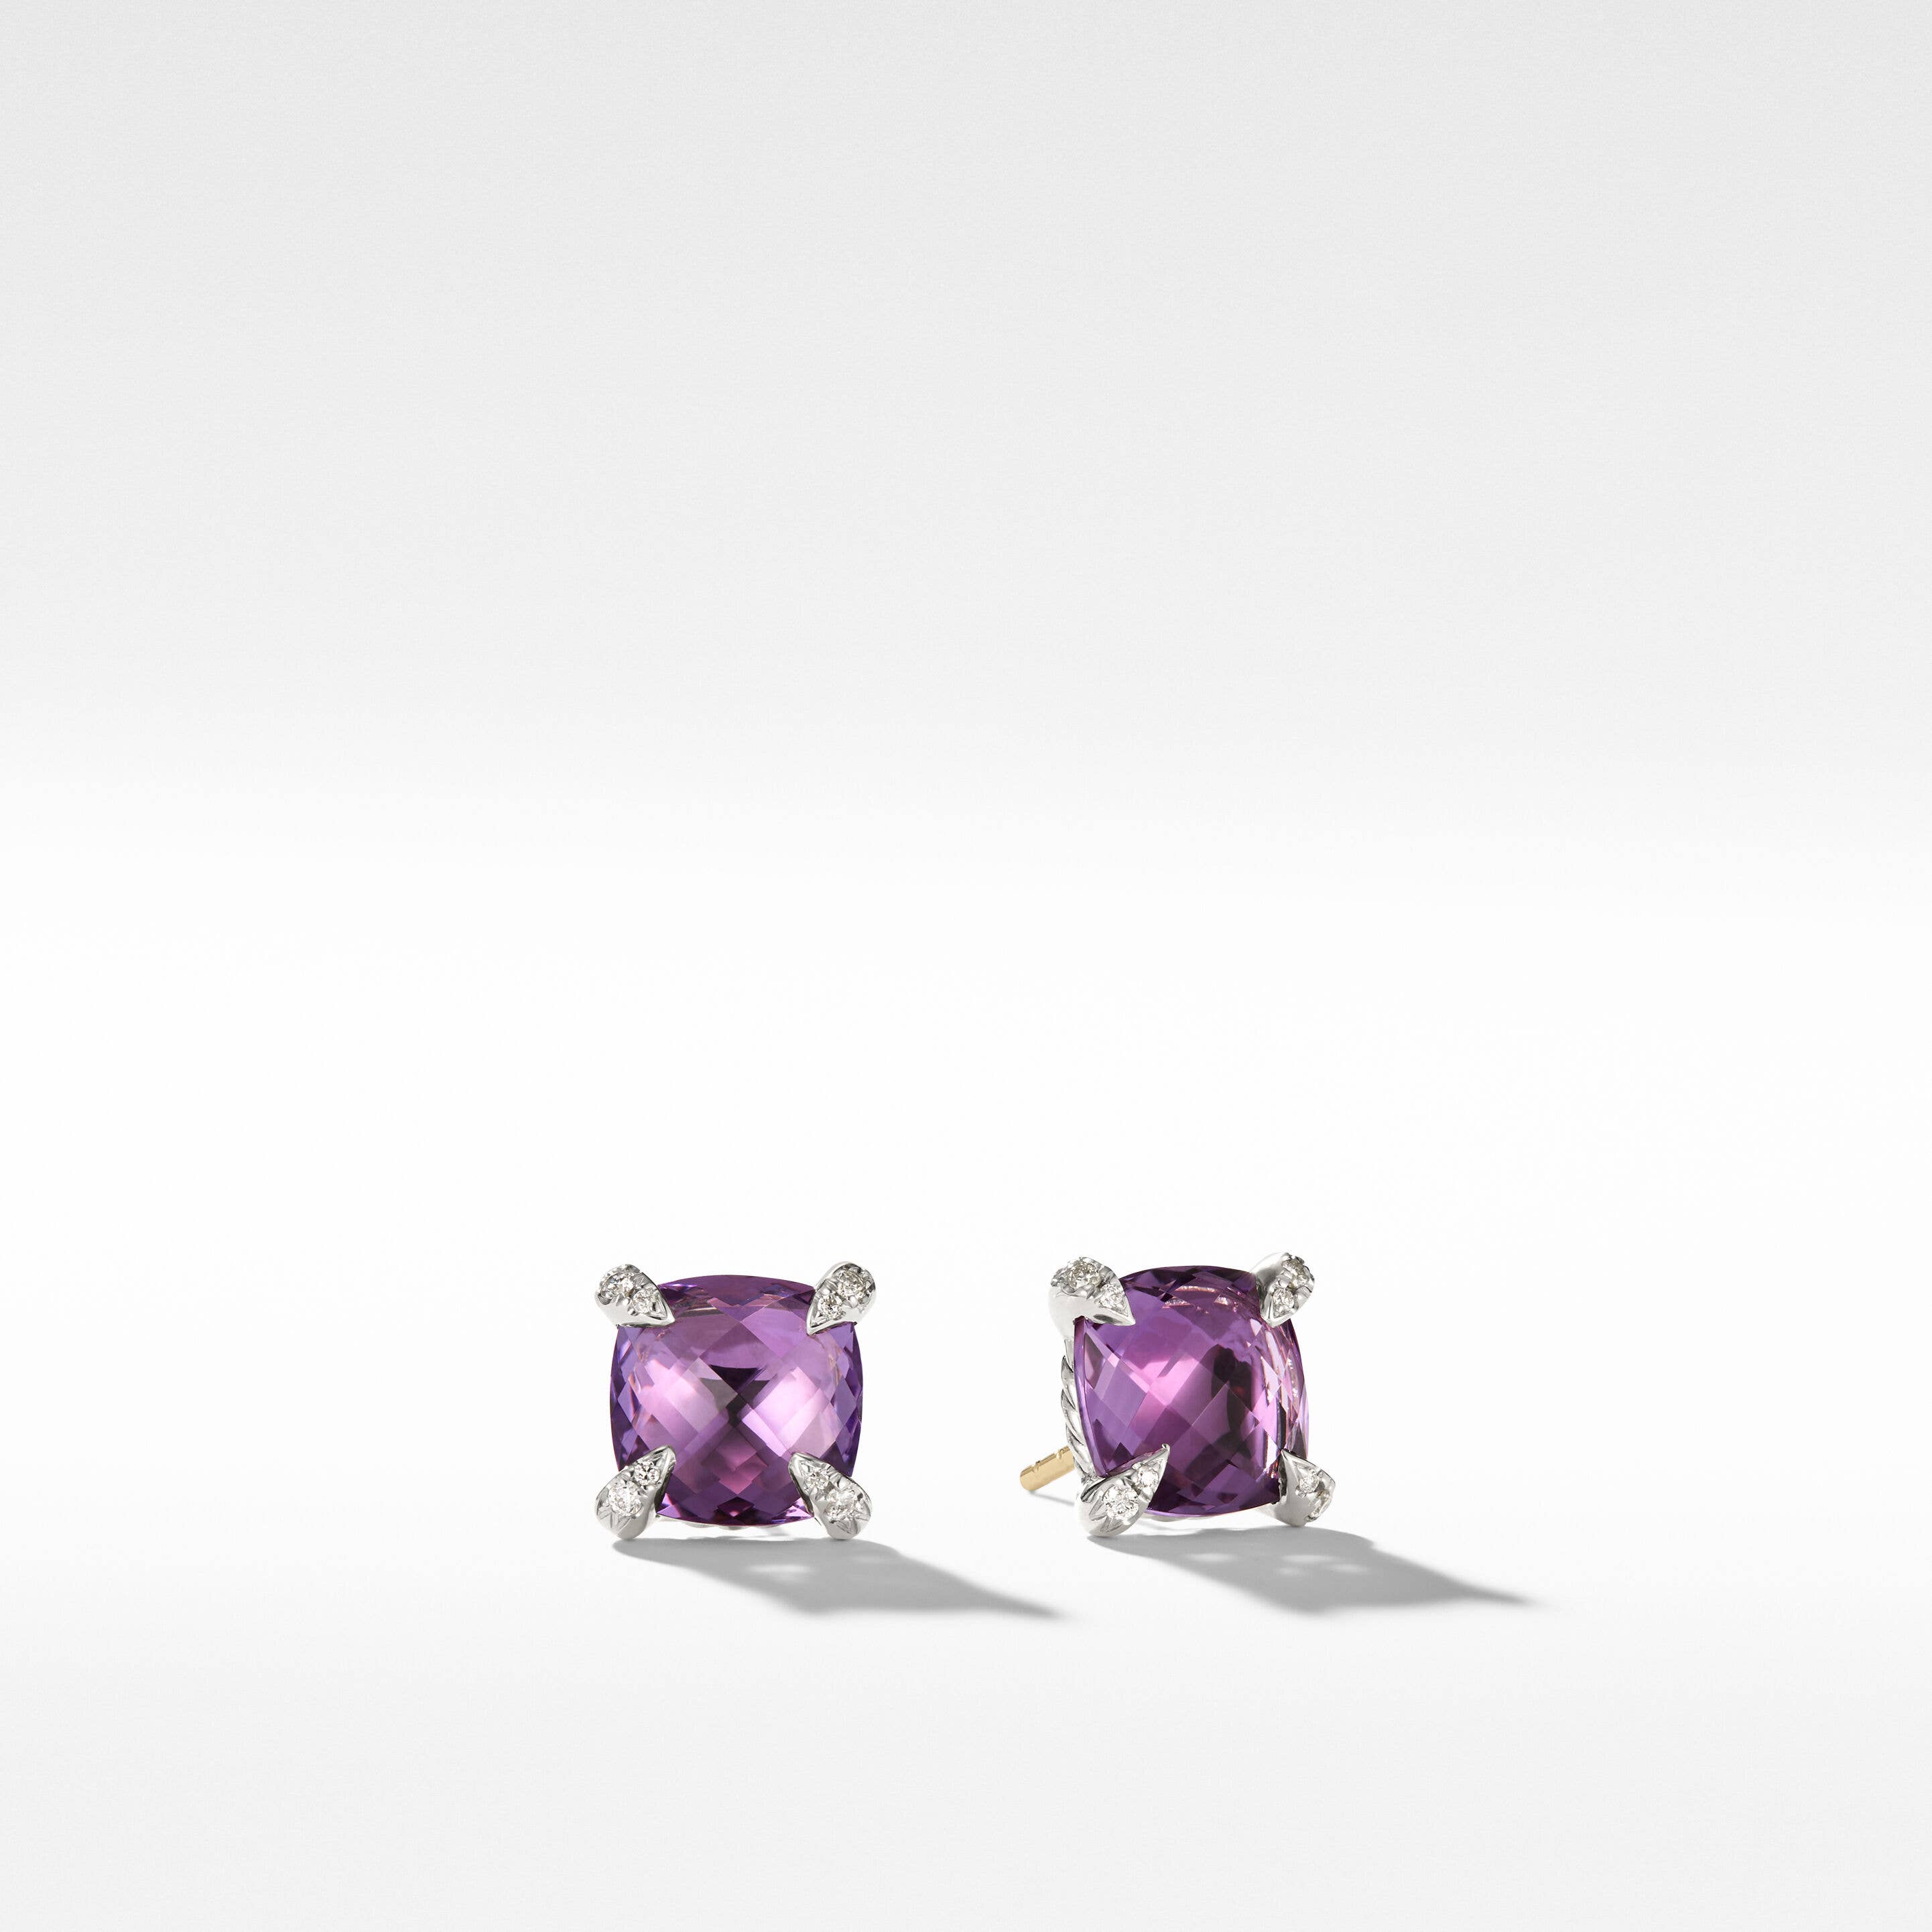 Chatelaine® Stud Earrings in Sterling Silver with Amethyst and Pavé Diamonds